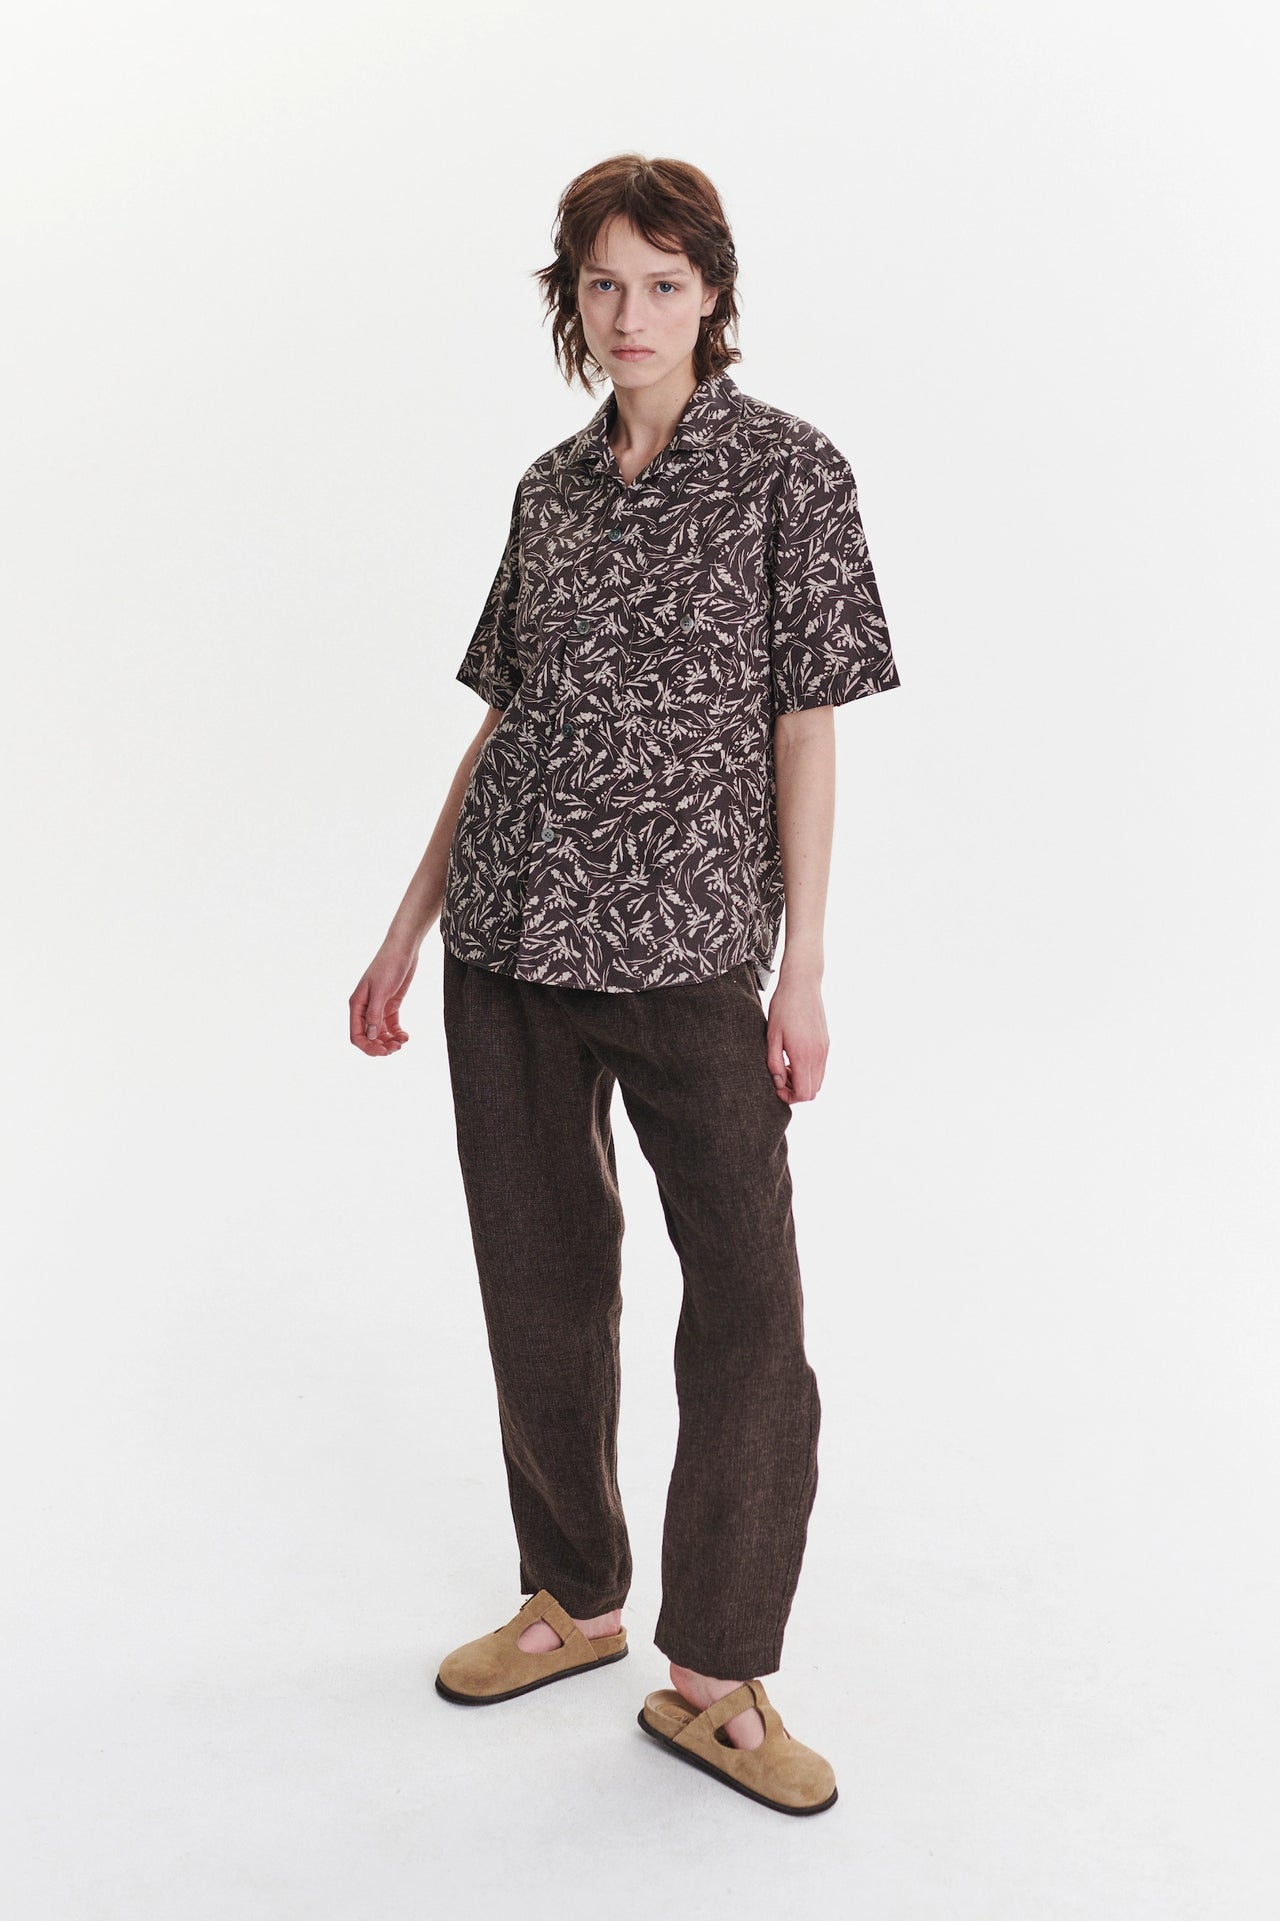 Unisex Short Sleeve Camp Collar Shirt in a Brown and Off White Floral Printed Italian Cotton